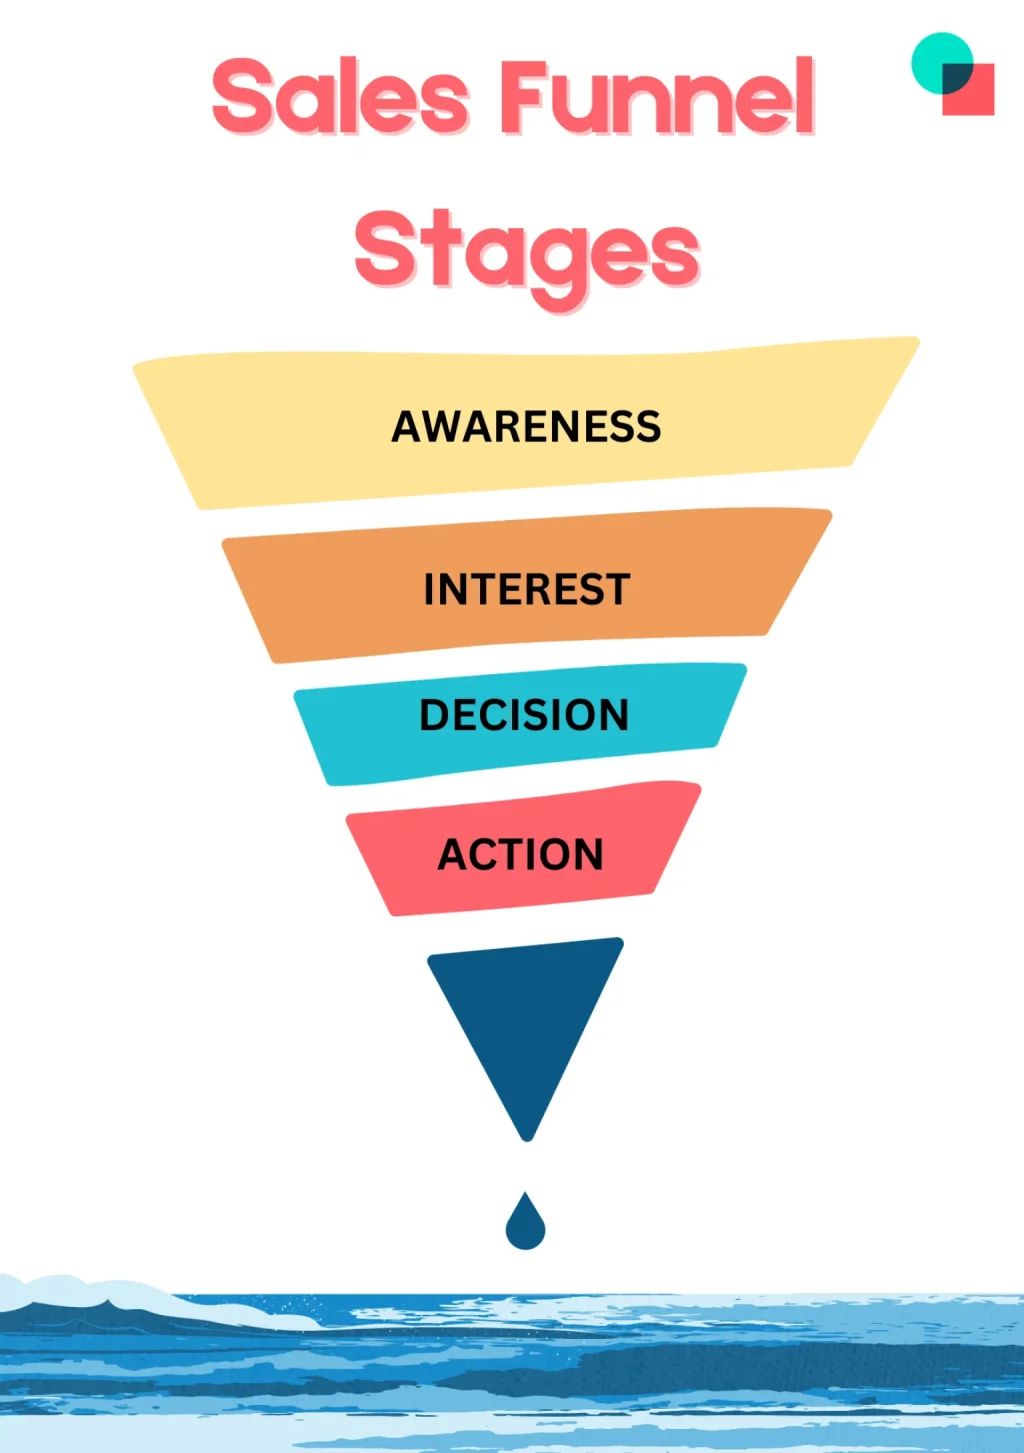 sales funnel stages.